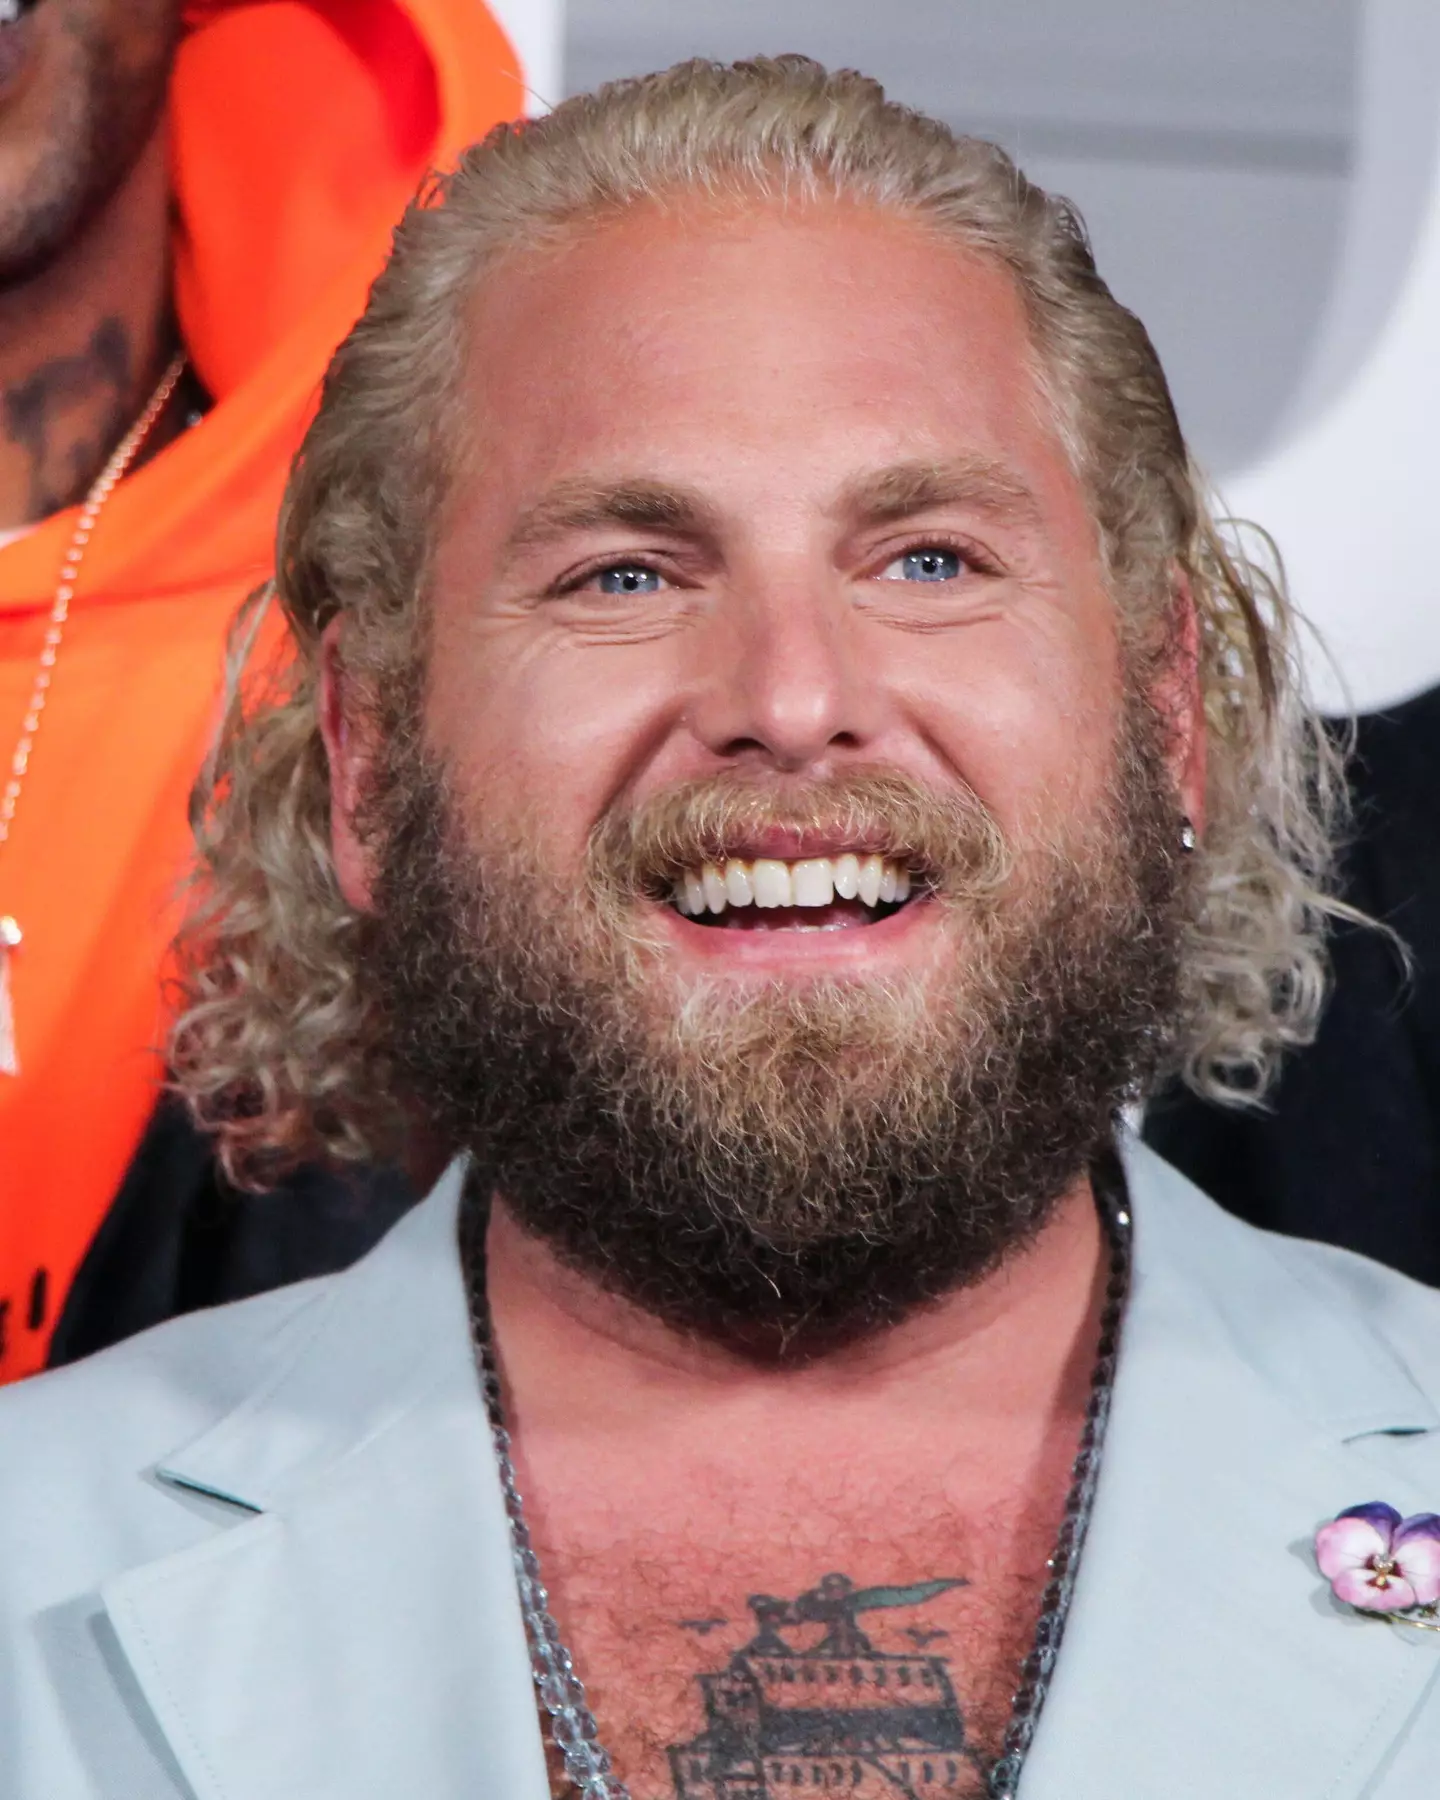 Jonah Hill at the premiere of Don't Look Up in 2021.